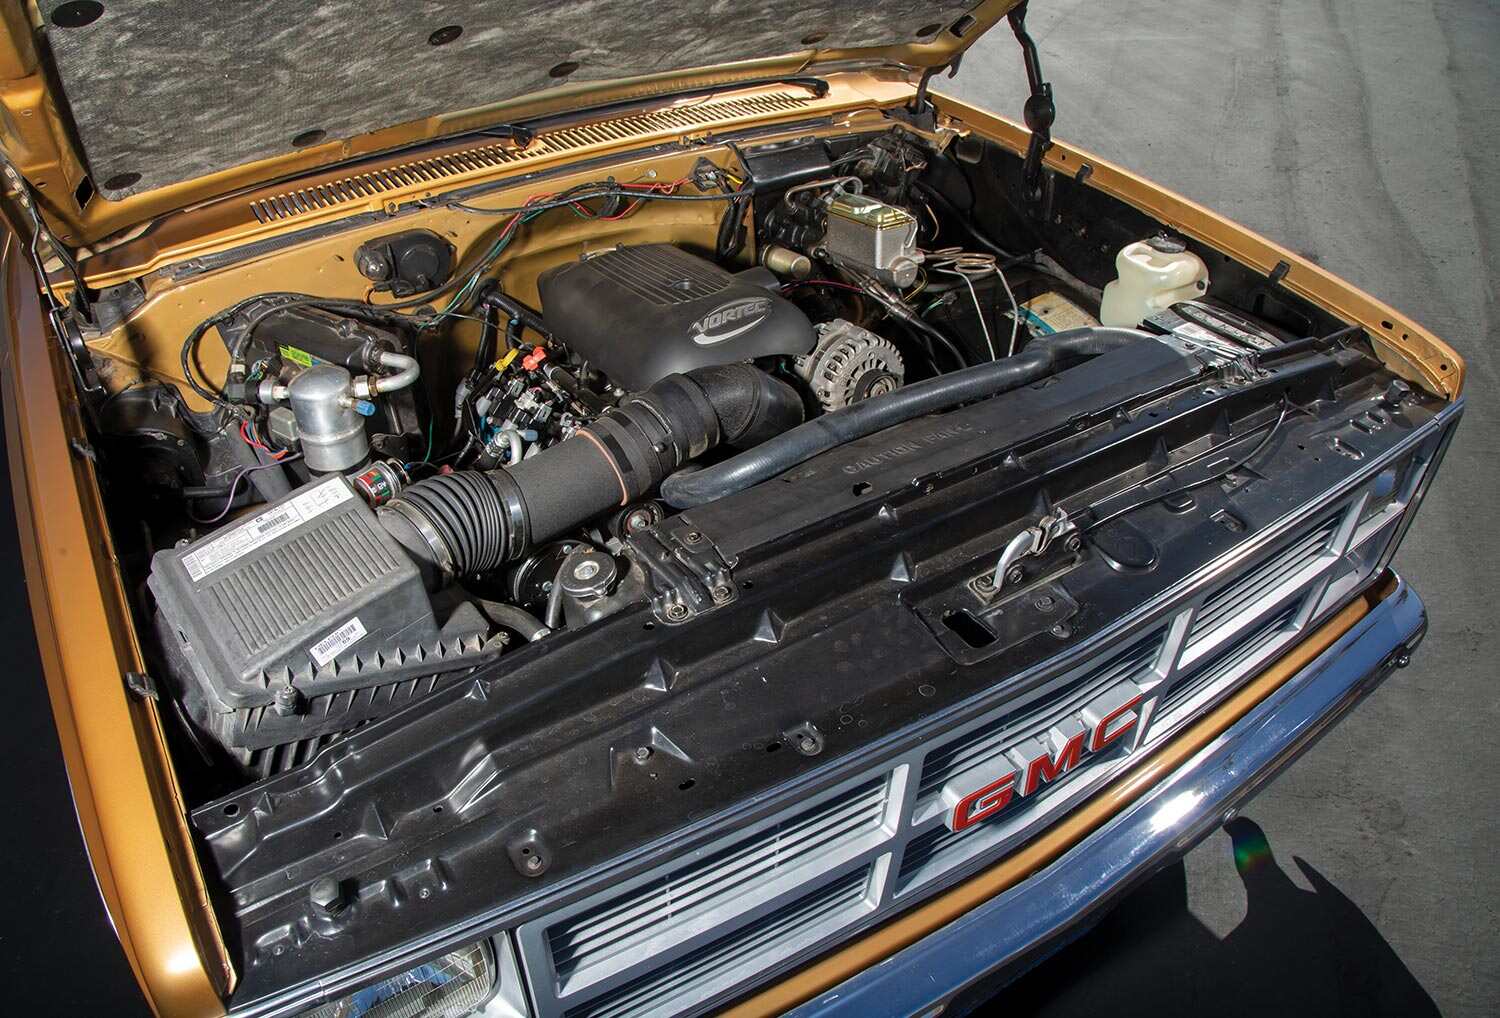 full view under the hood of the '84 GMC Sierra